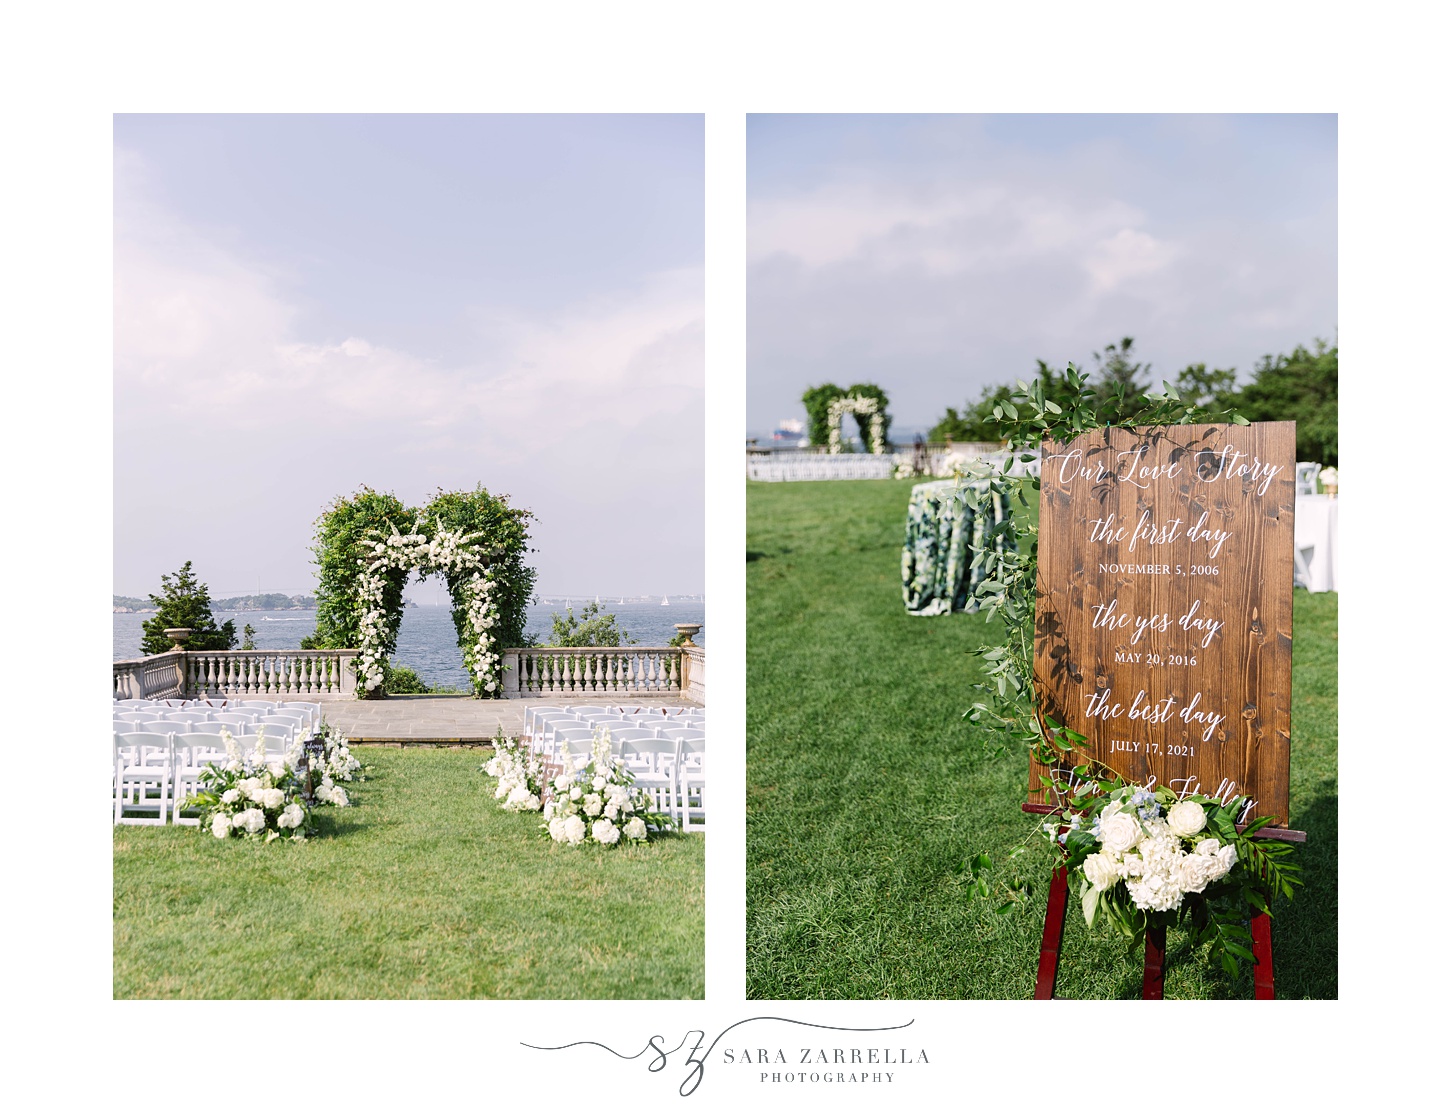 details for waterfront wedding ceremony in Rhode Island